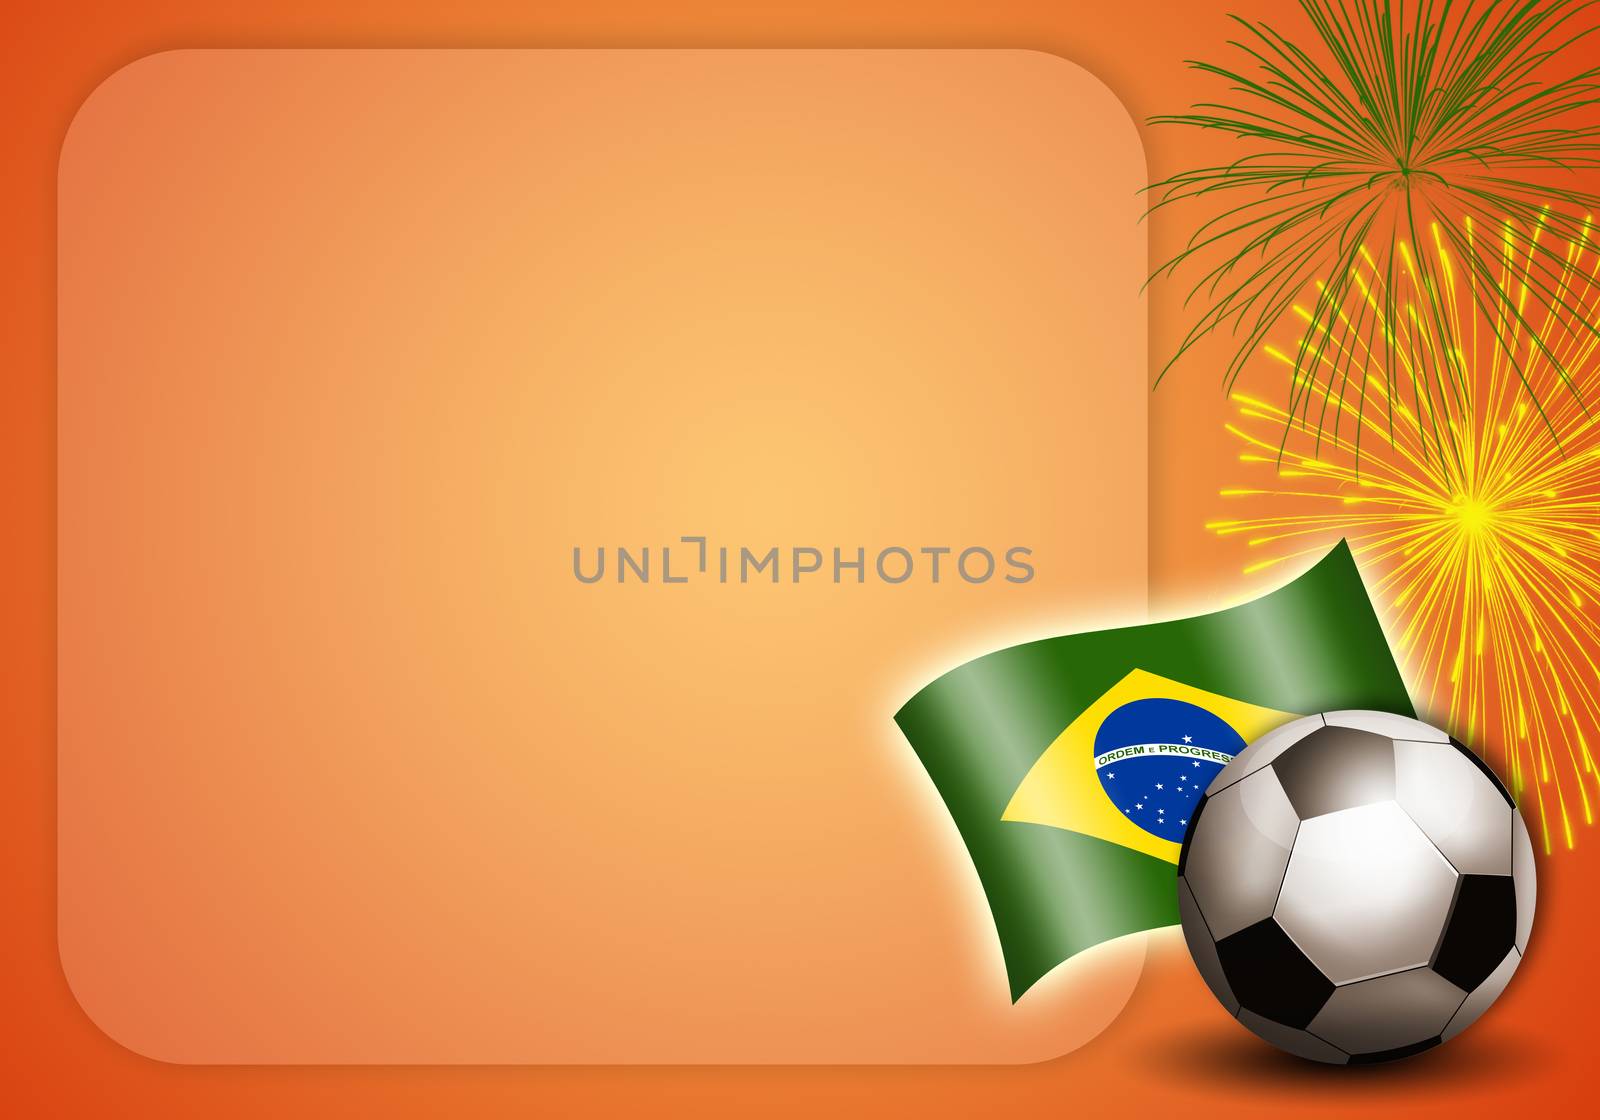 an illustration of Soccer world cup 2014 in Brazil